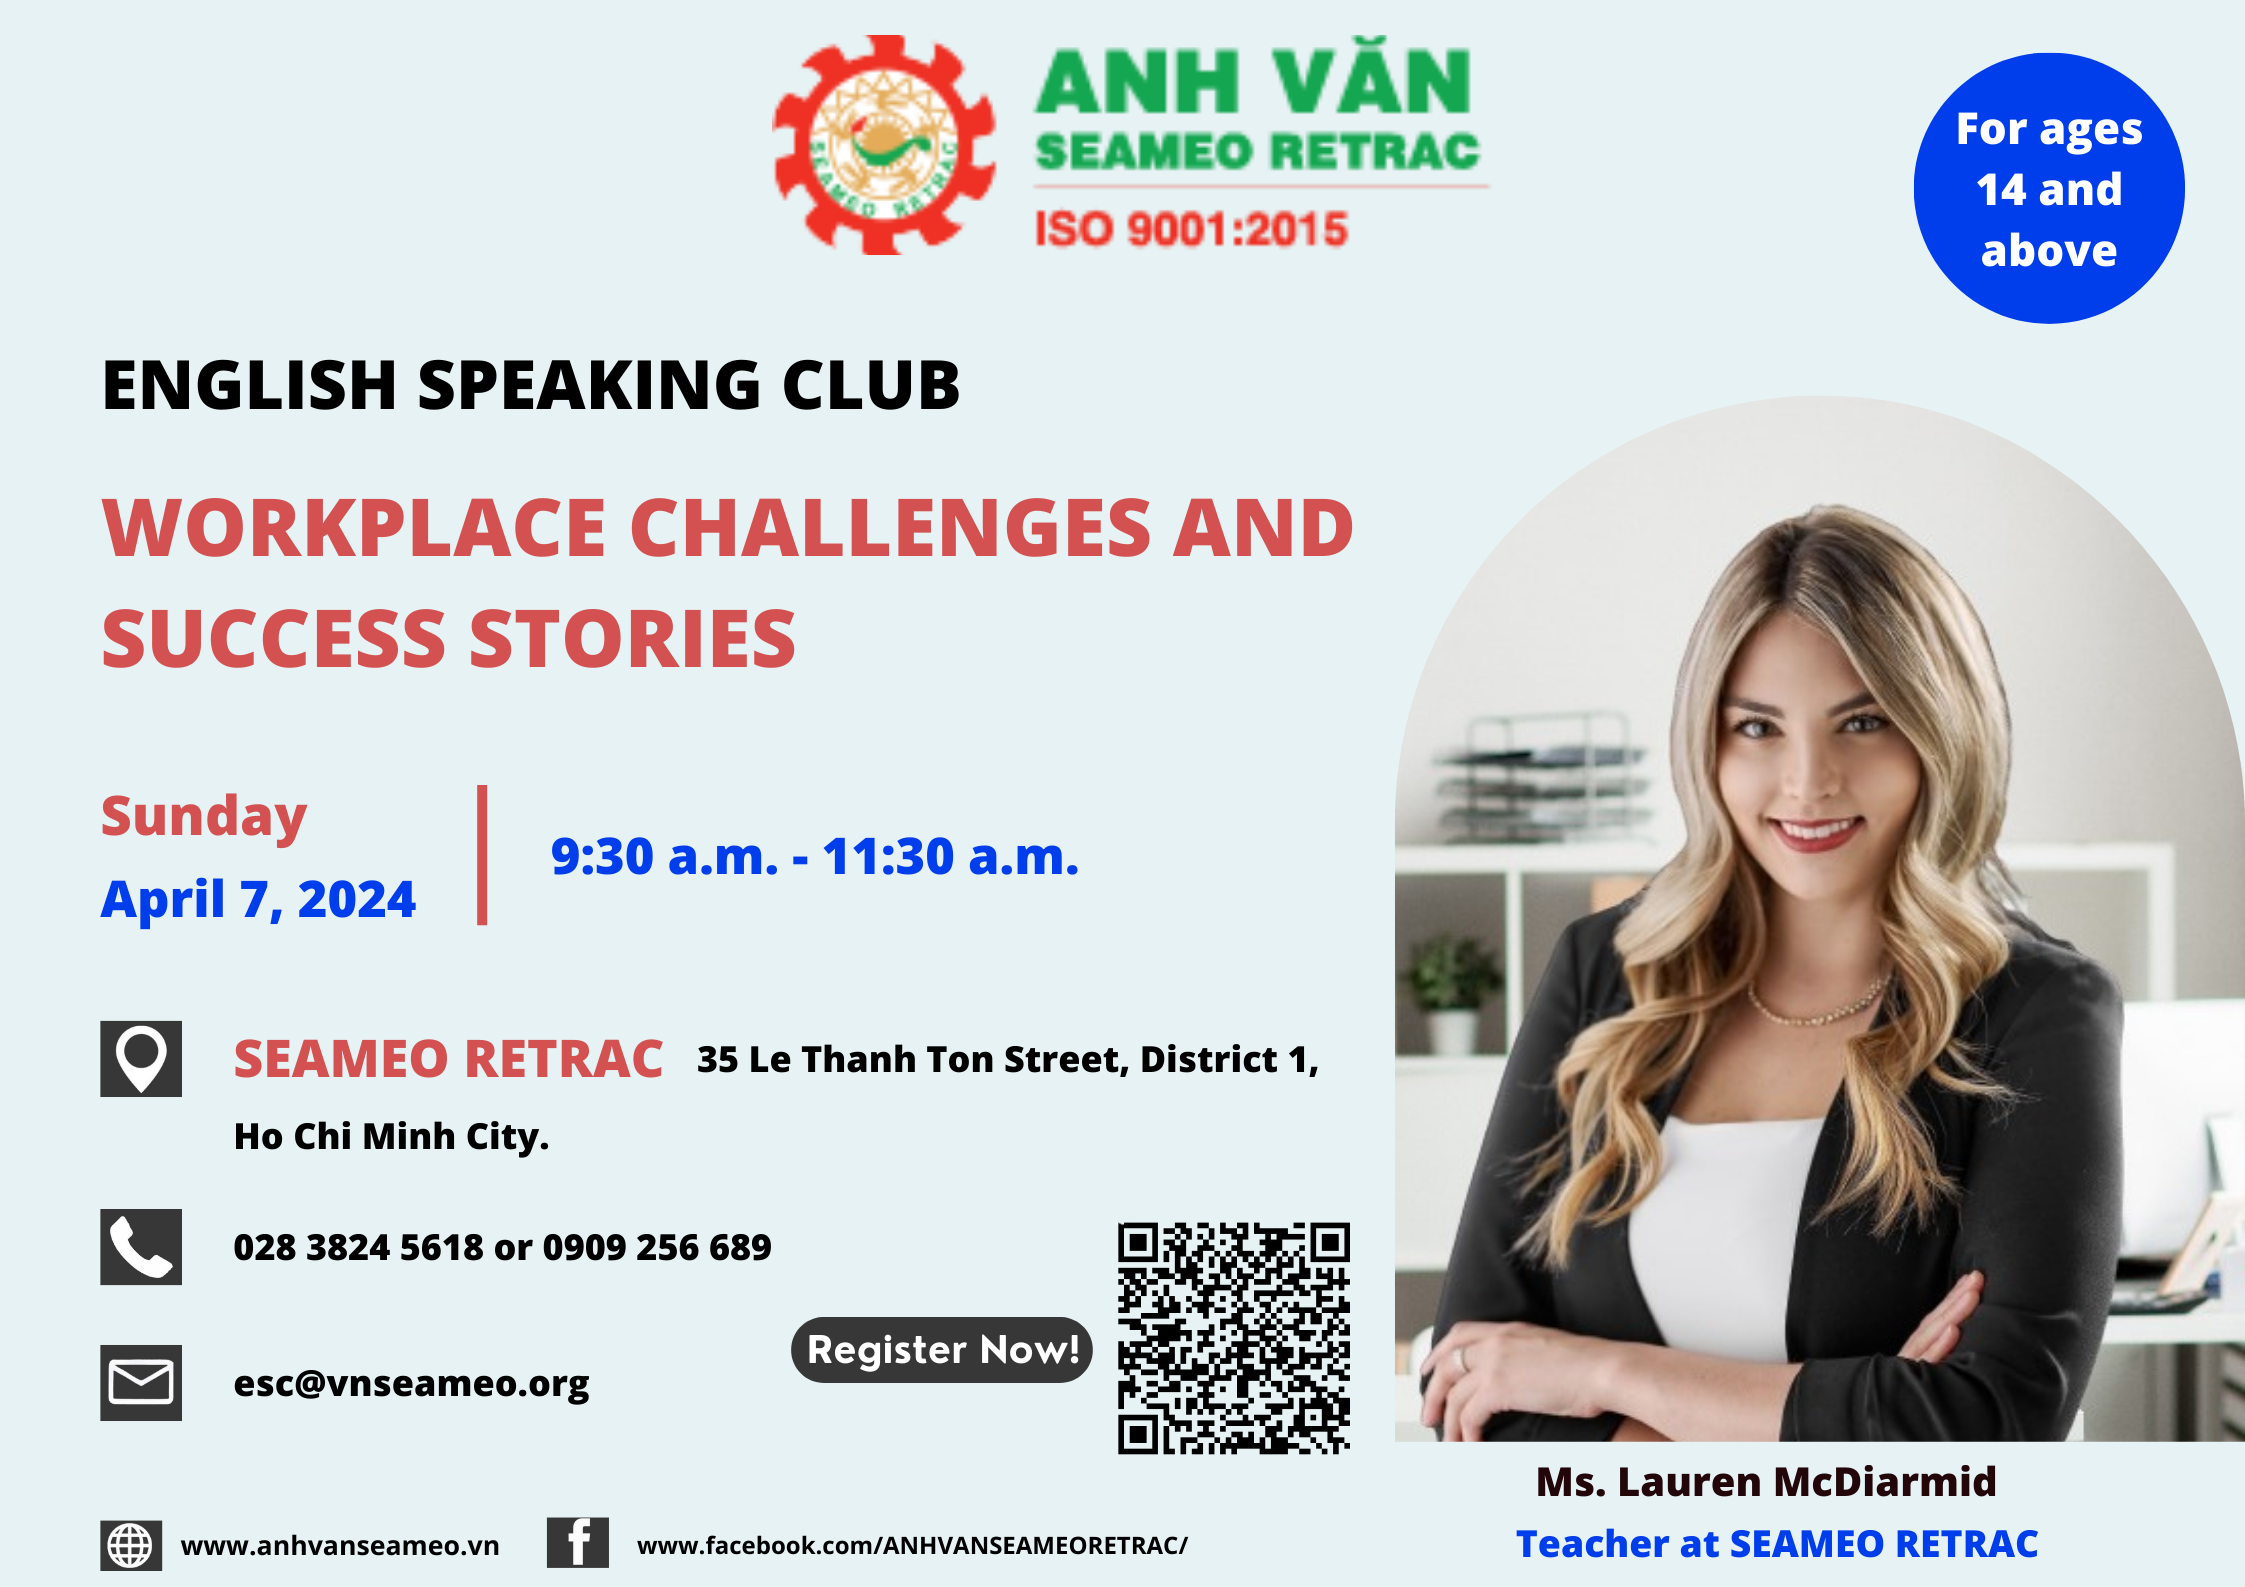 English Speaking Club: Topic: “Workplace Challenges and Success Stories”